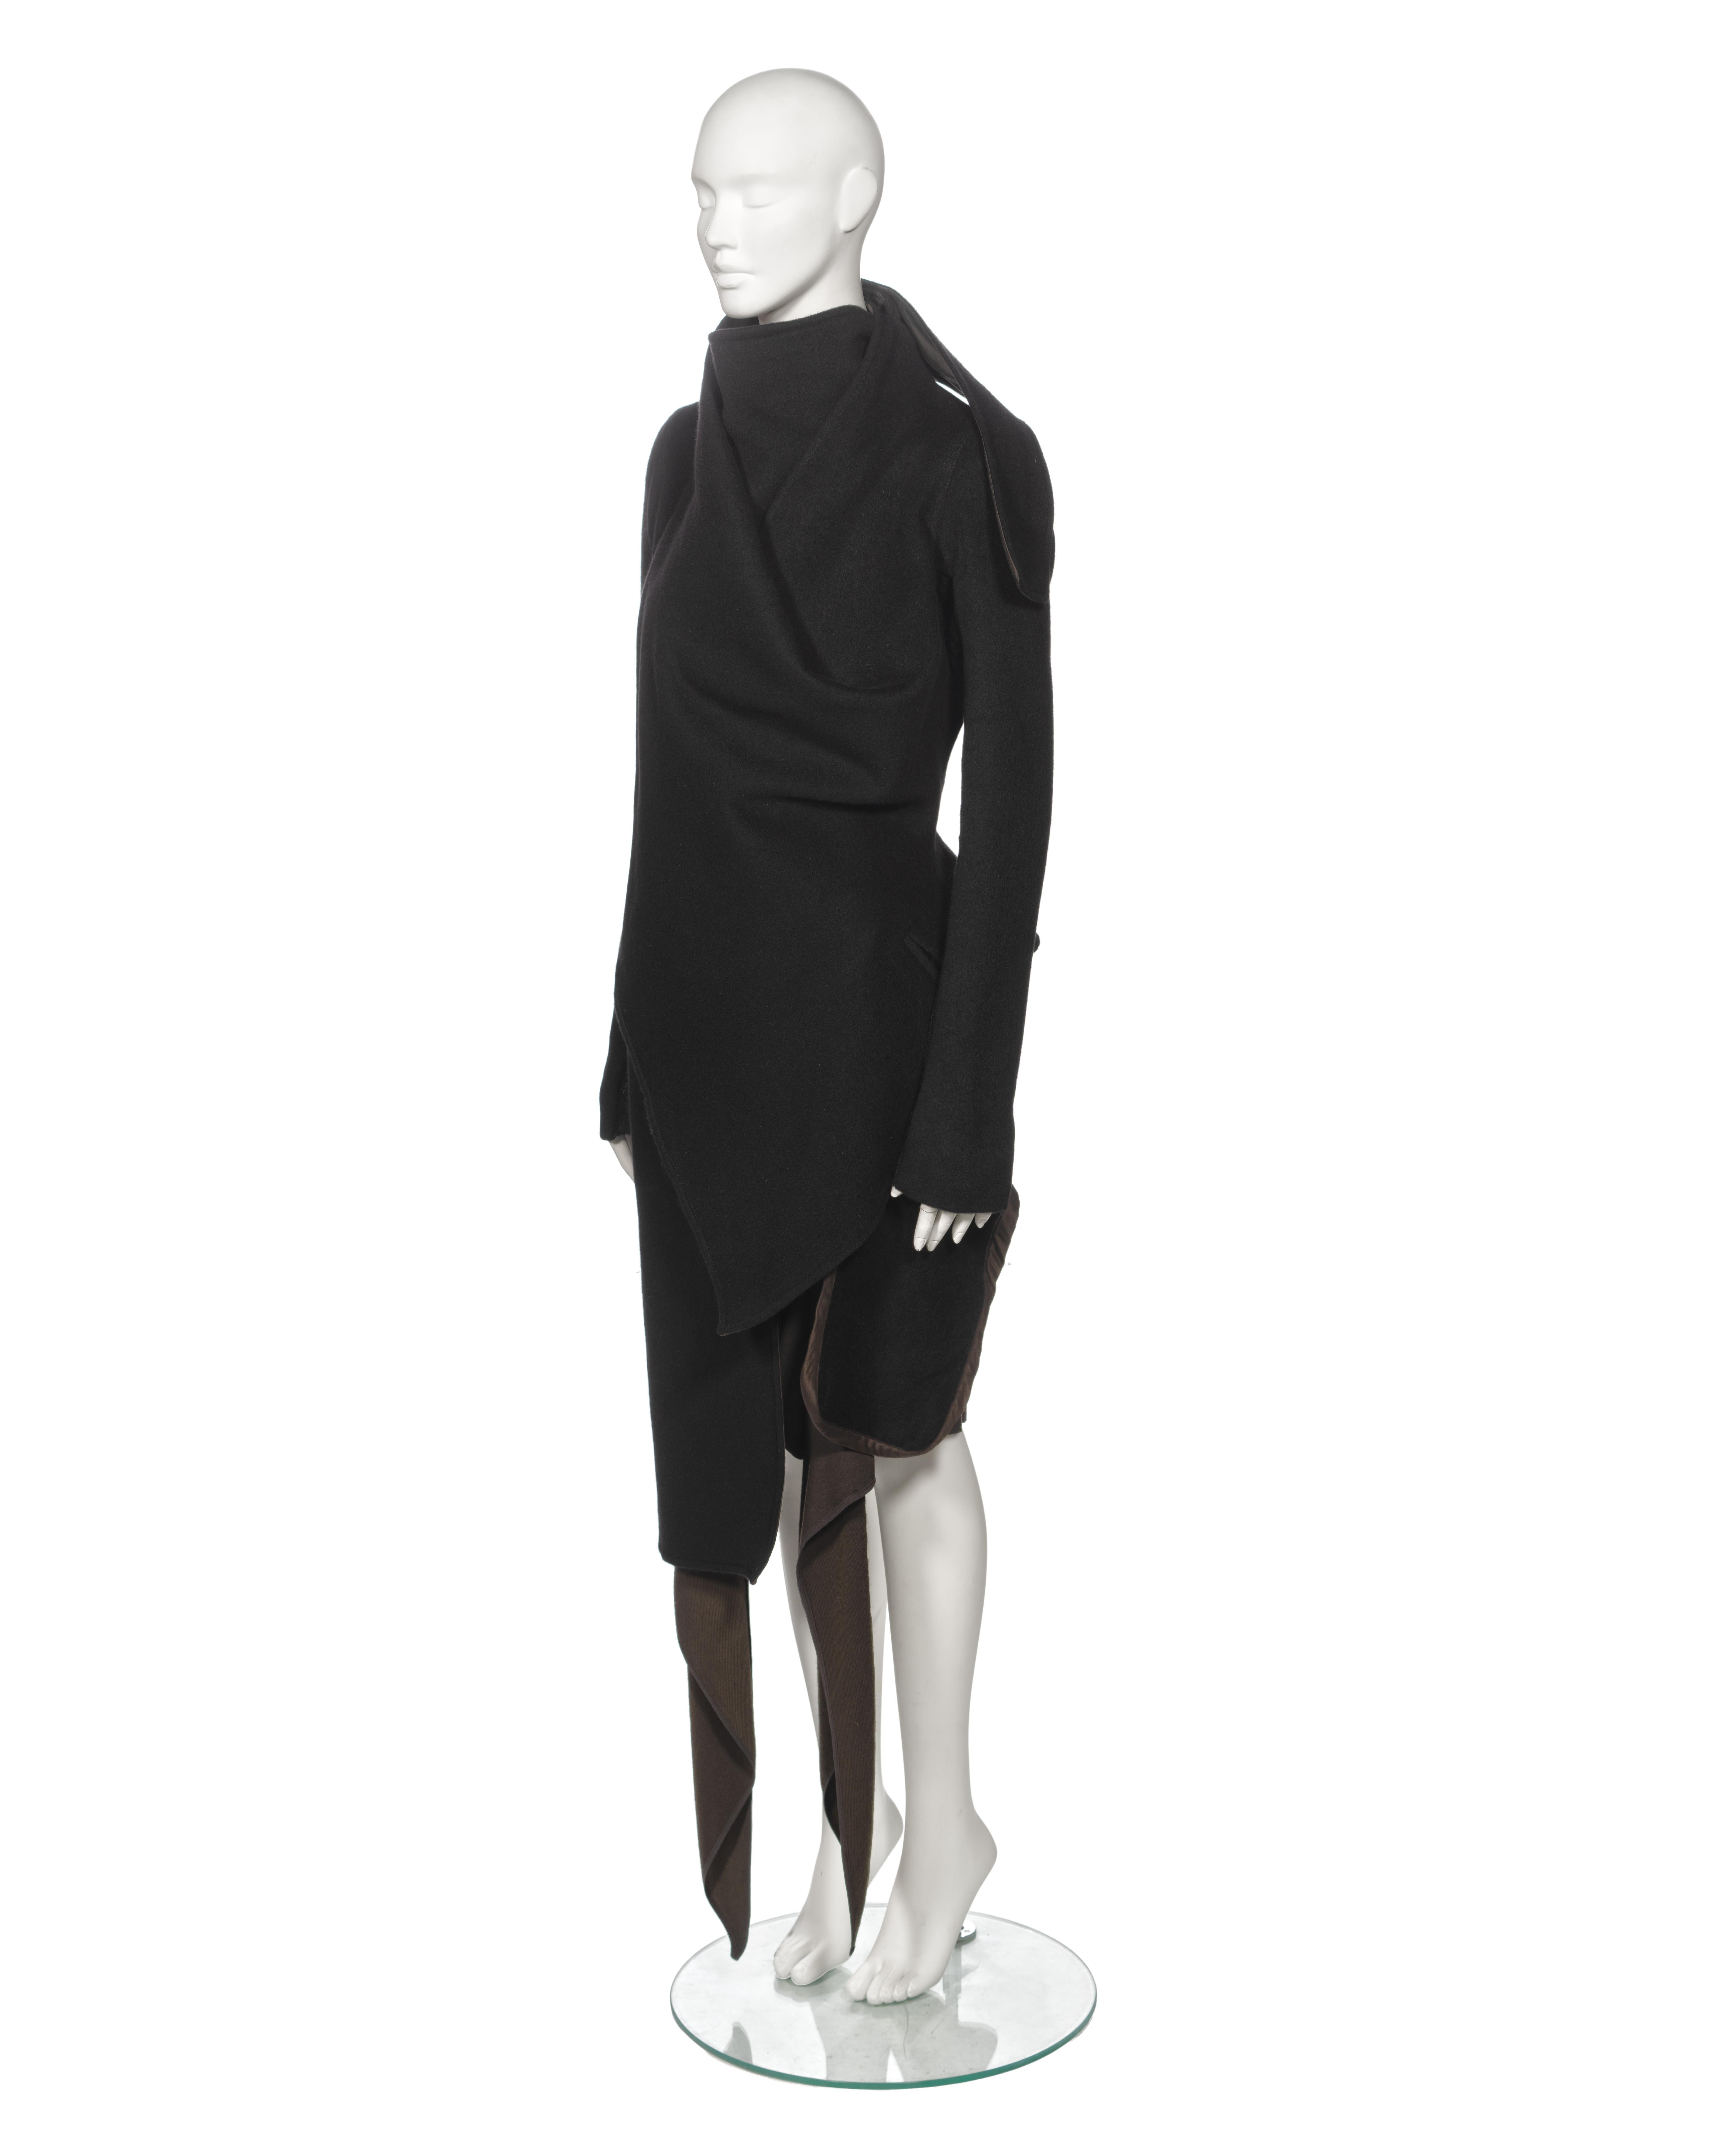 Rick Owens Angora Jacket and Cashmere Skirt 'Queen' Ensemble, fw 2004 For Sale 7